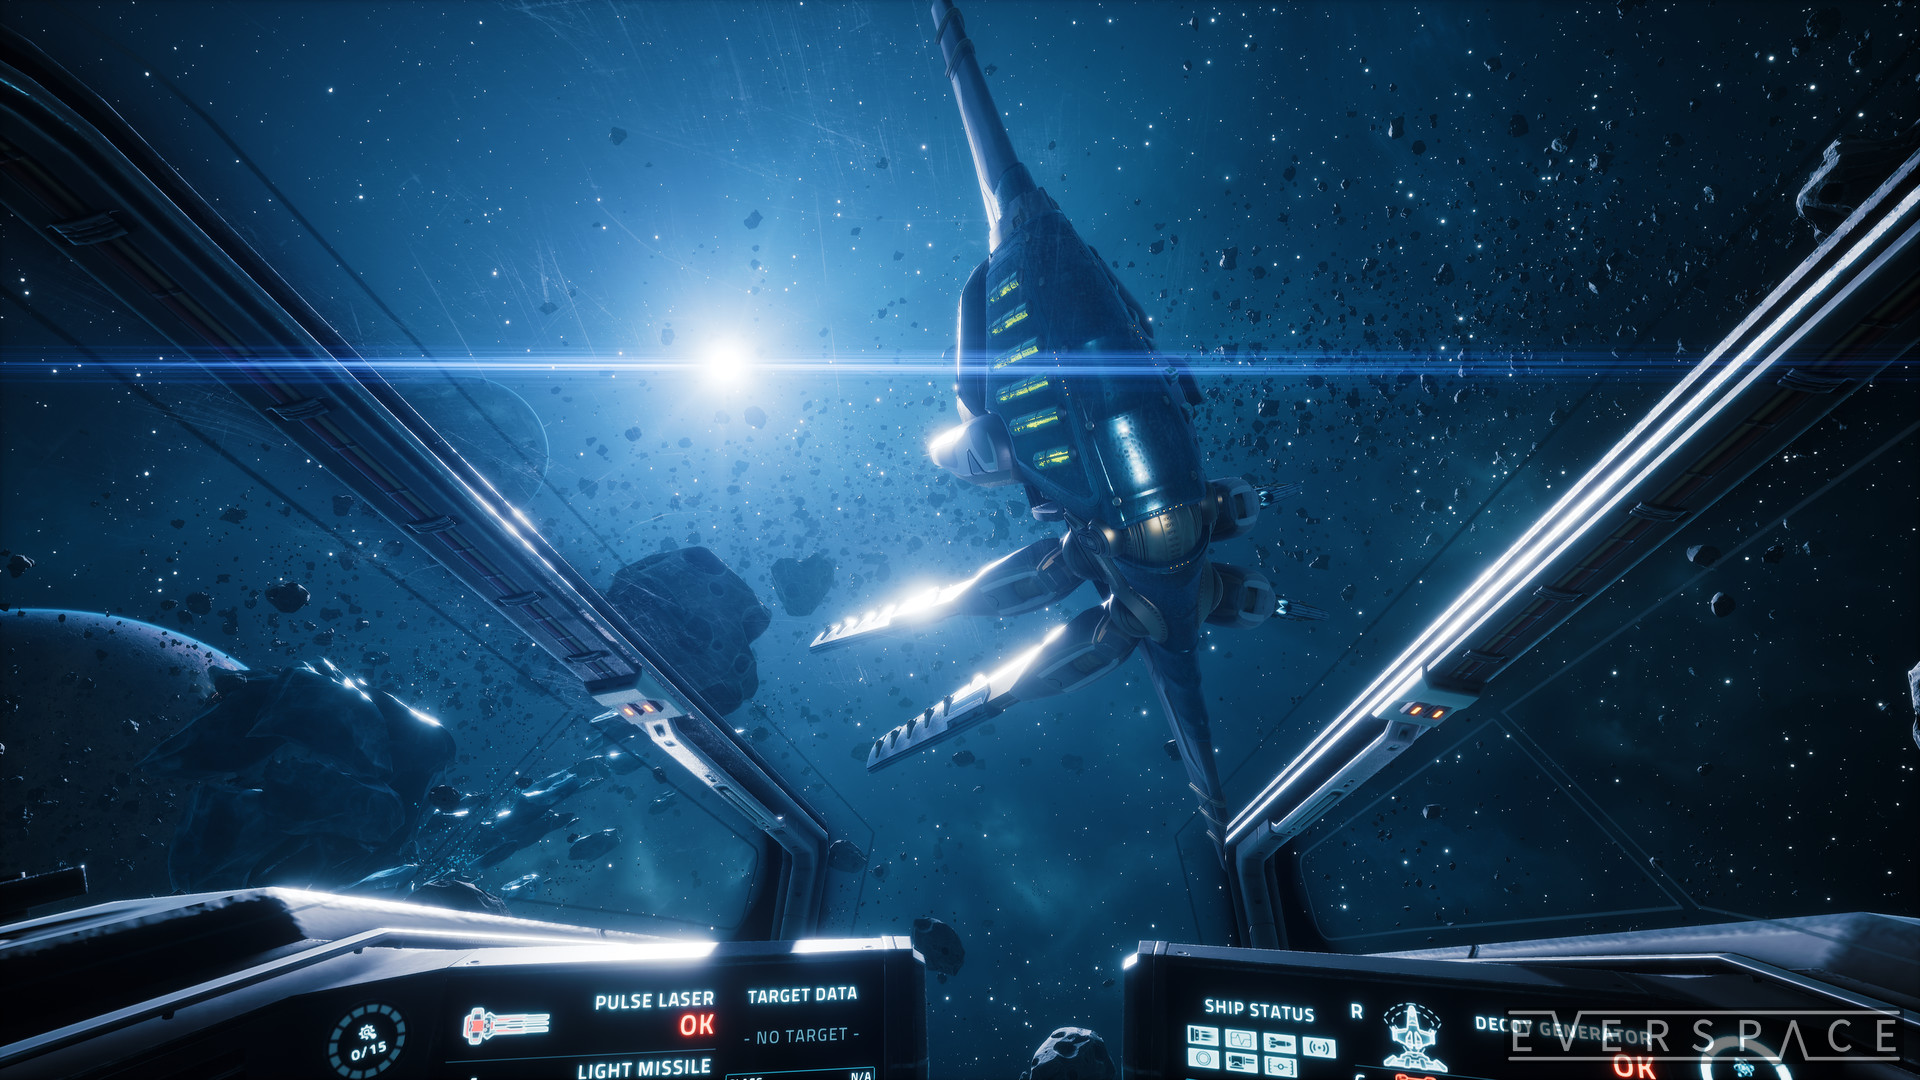 EVERSPACE – Encounters Pc Game Free Download Torrent